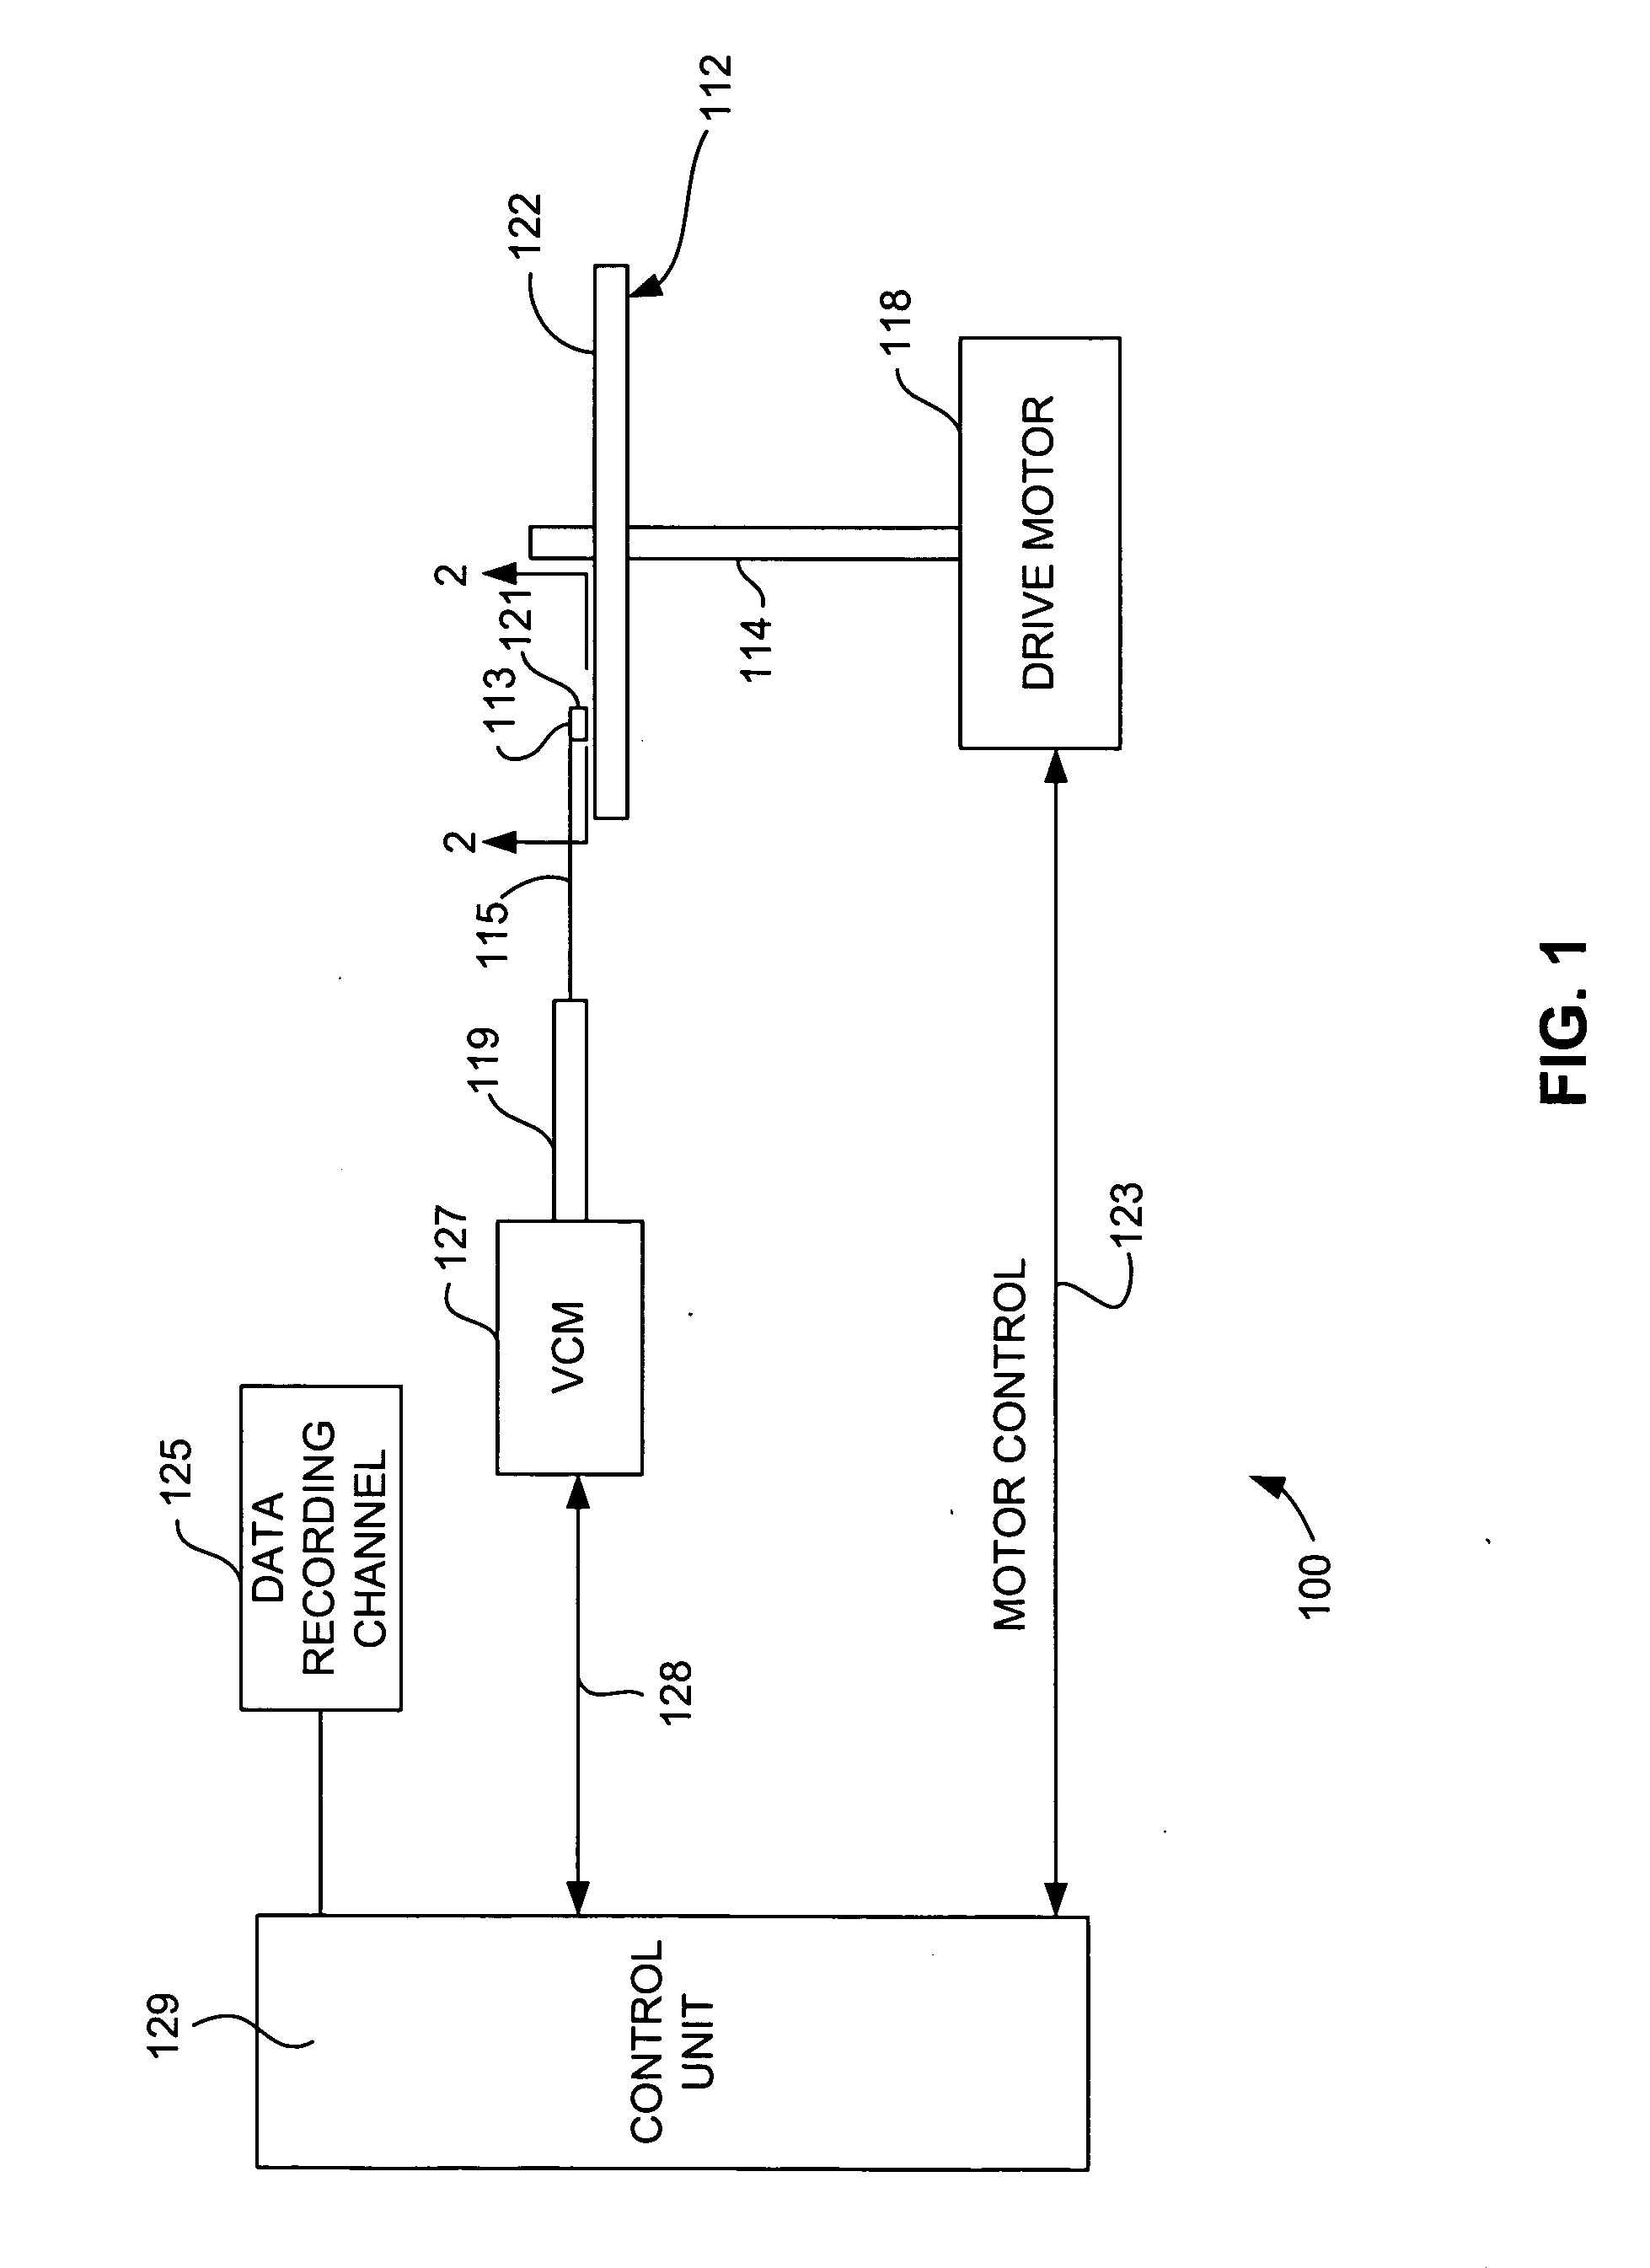 Dual CPP GMR sensor with in-stack bias structure